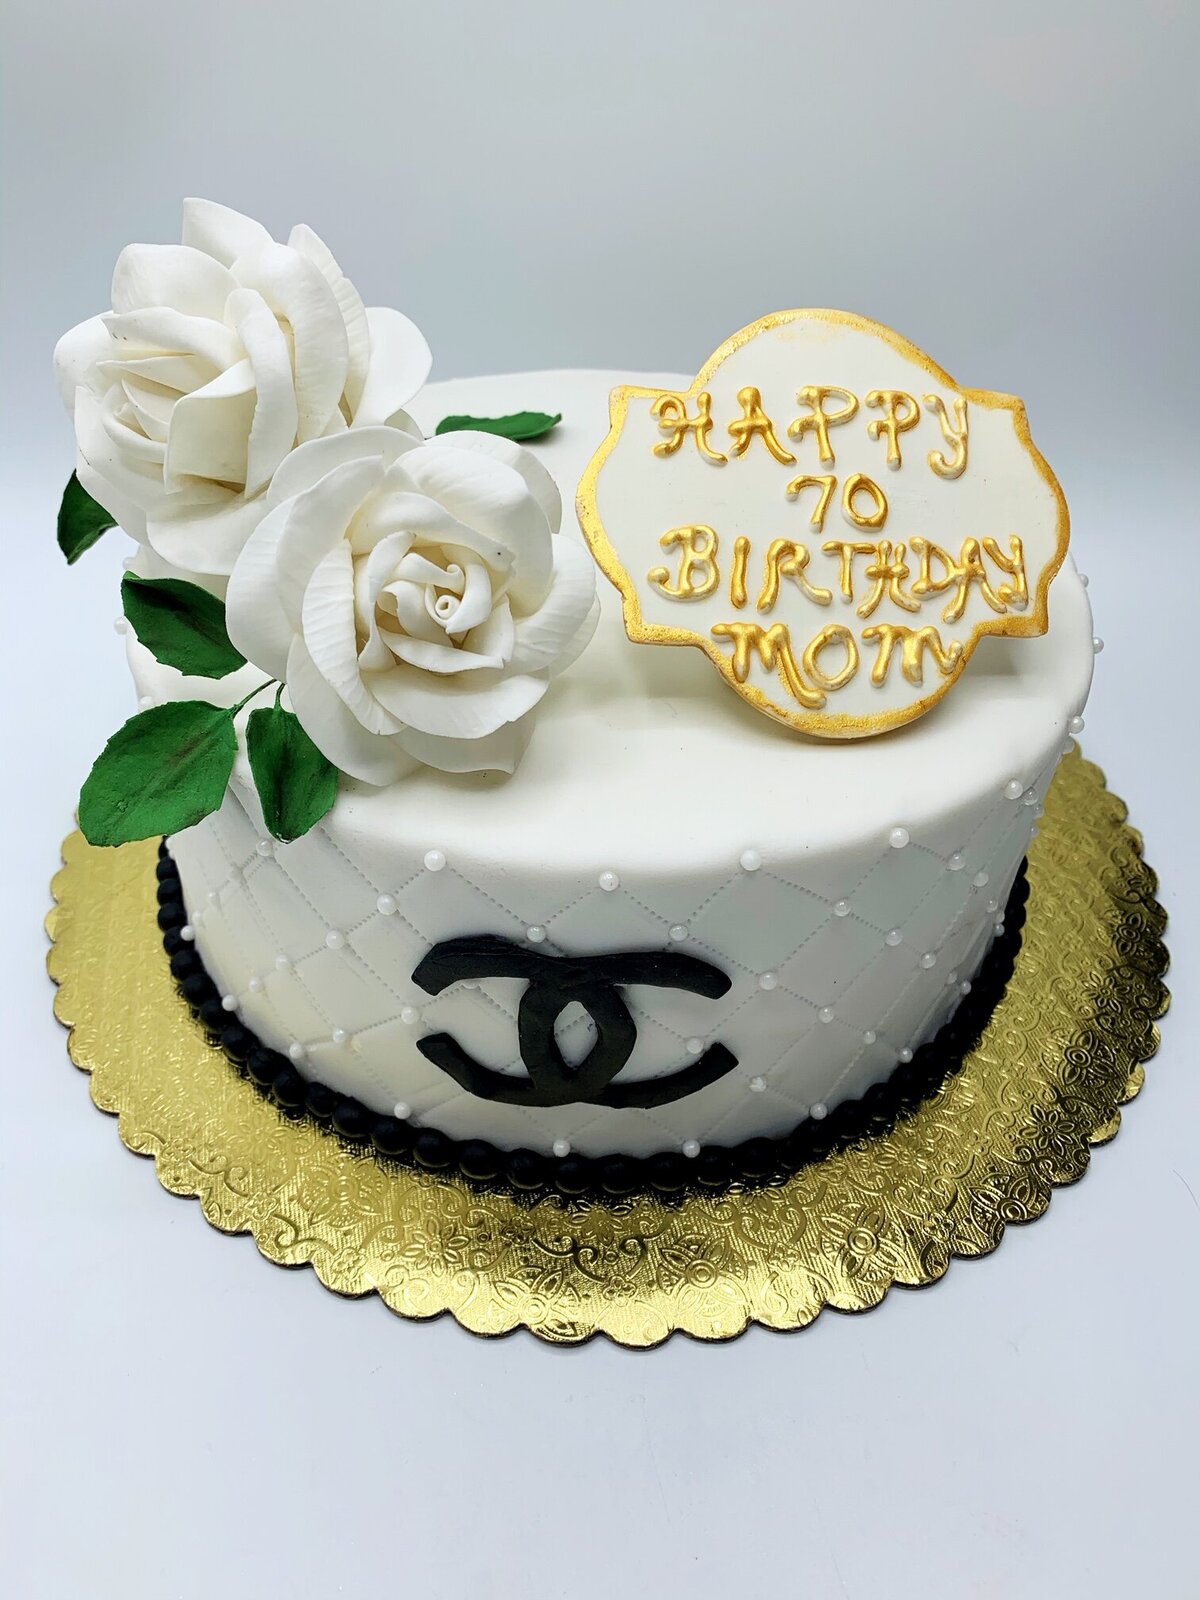 Designer inspired single tier cake with Chanel logo in black and white roses on top